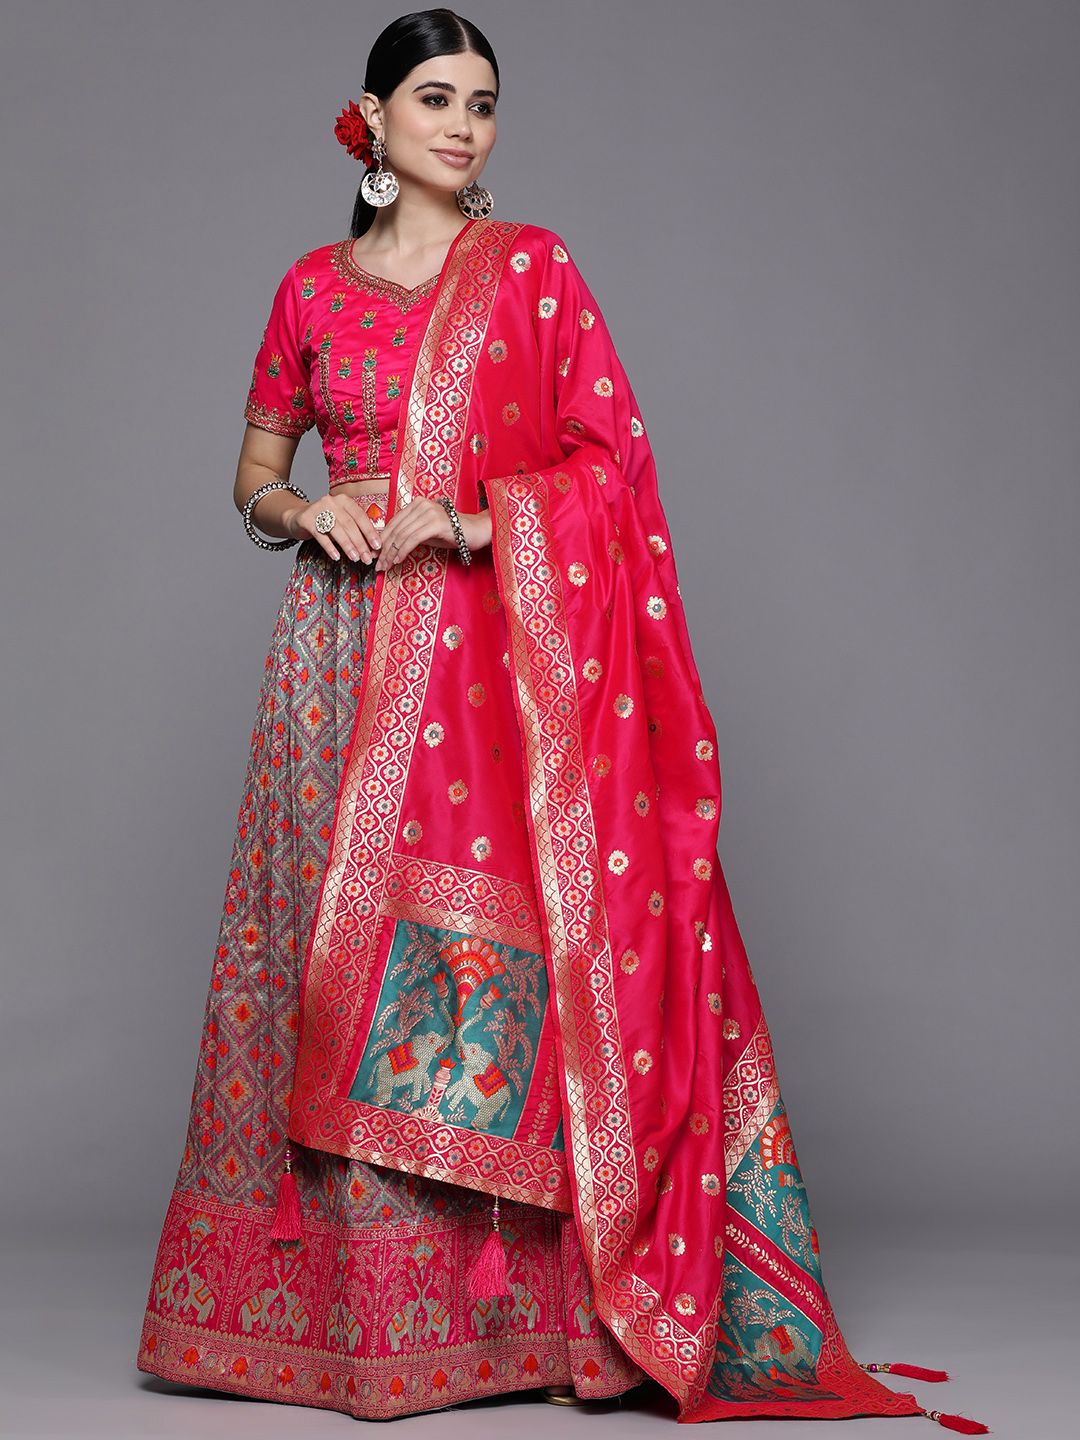 Mitera Grey & Pink Semi-Stitched Lehenga & Unstitched Blouse With Dupatta Price in India